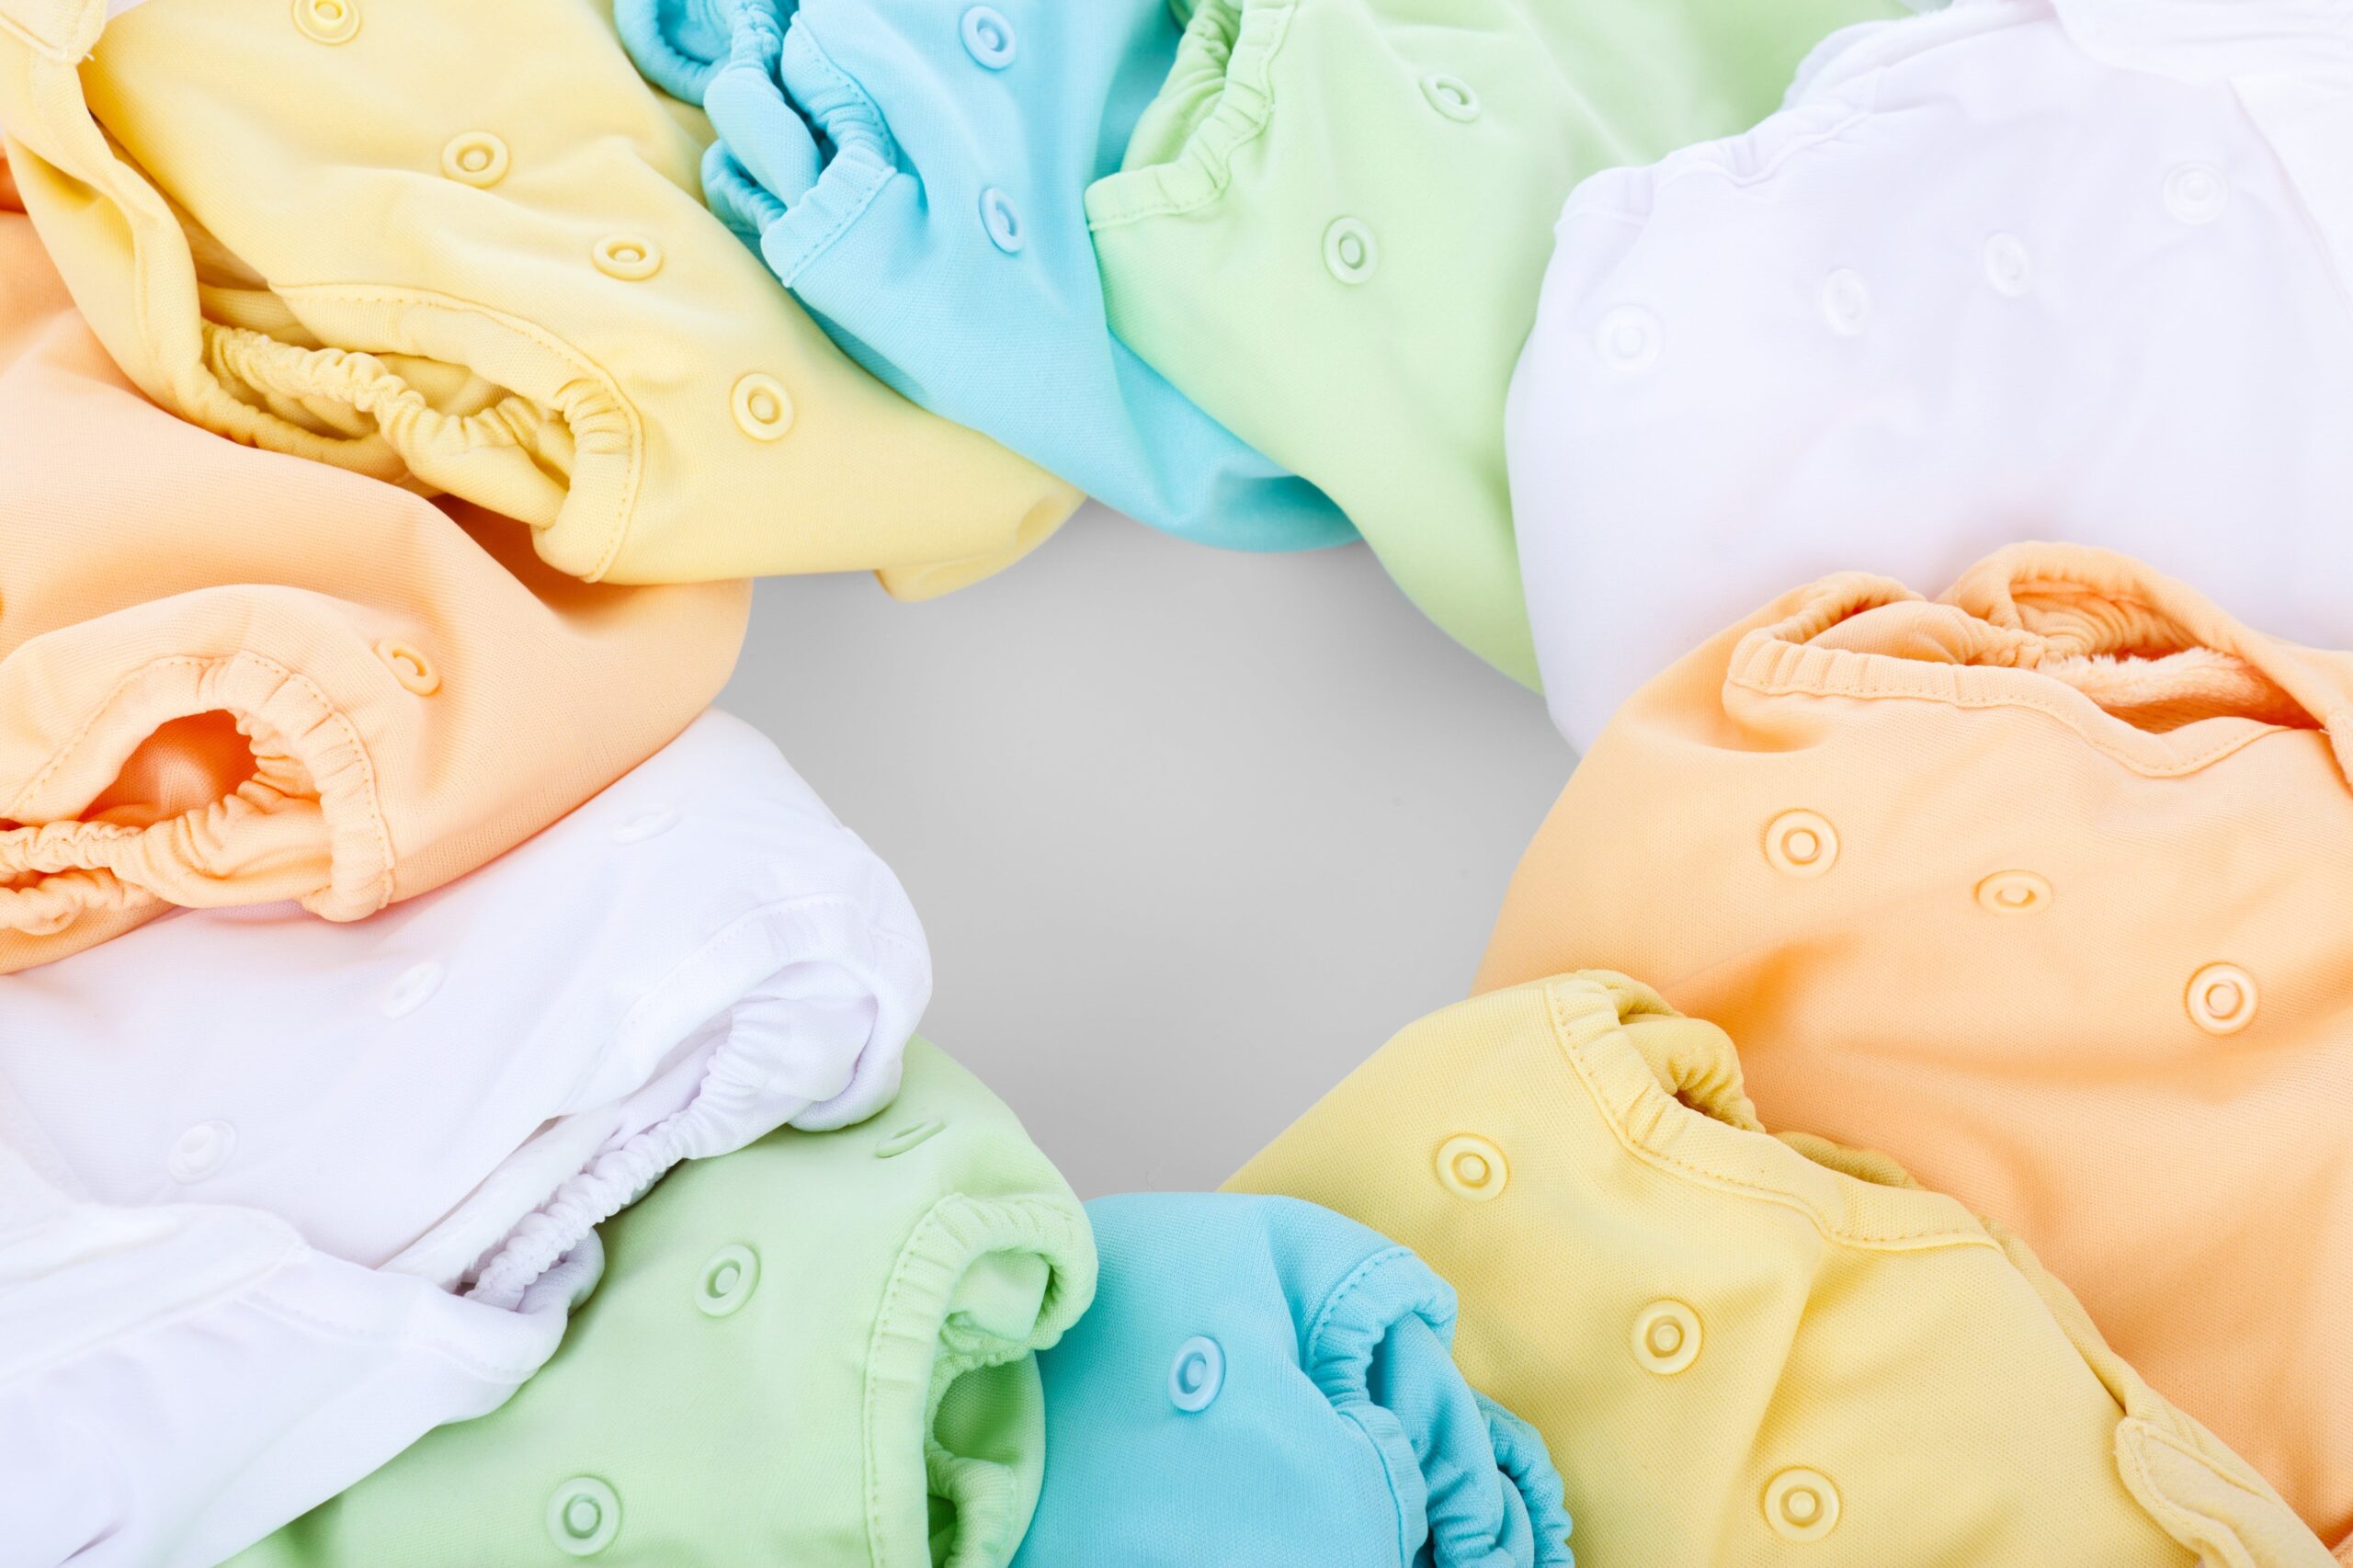 Reusable nappies can be gifted to loved ones who have babies in the family. They can help new parents to reduce waste and save money in the long run.